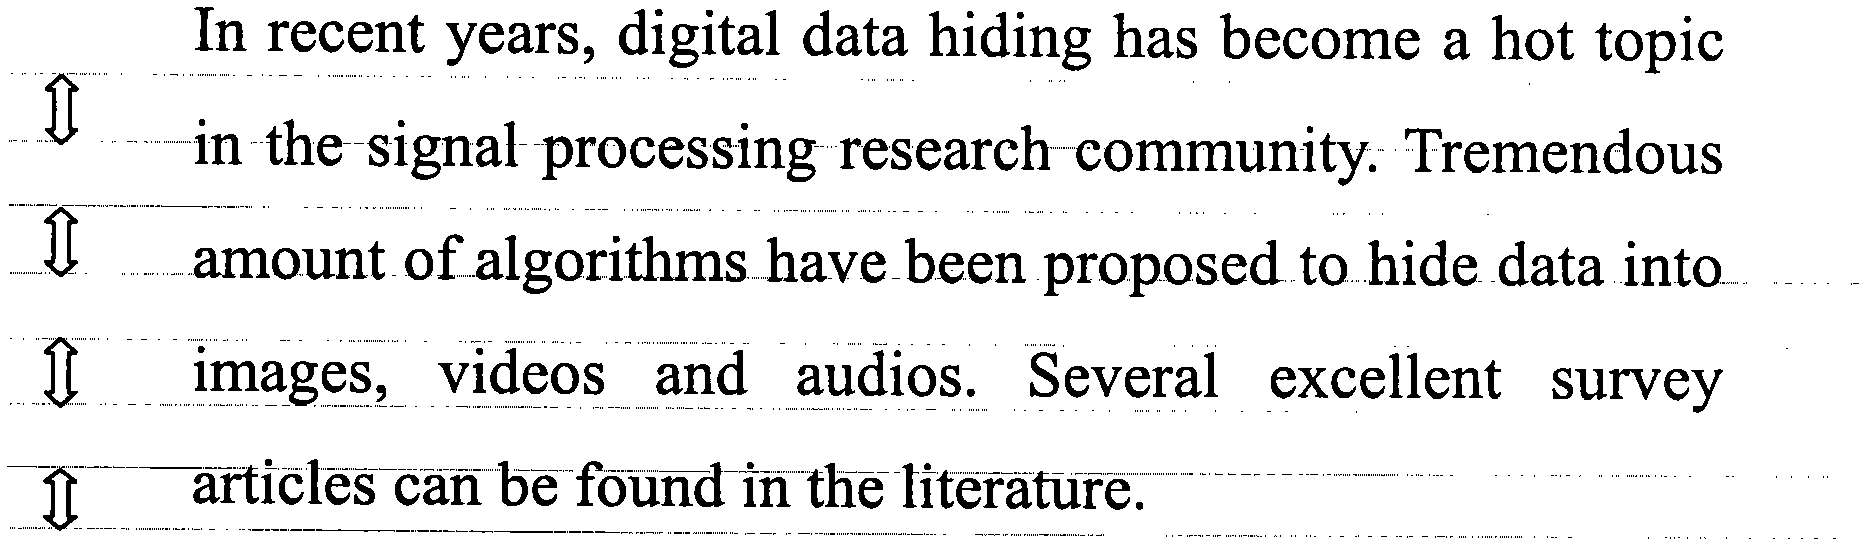 Anti-printing and scanning watermark algorithm for two-value text image based on row space and word space